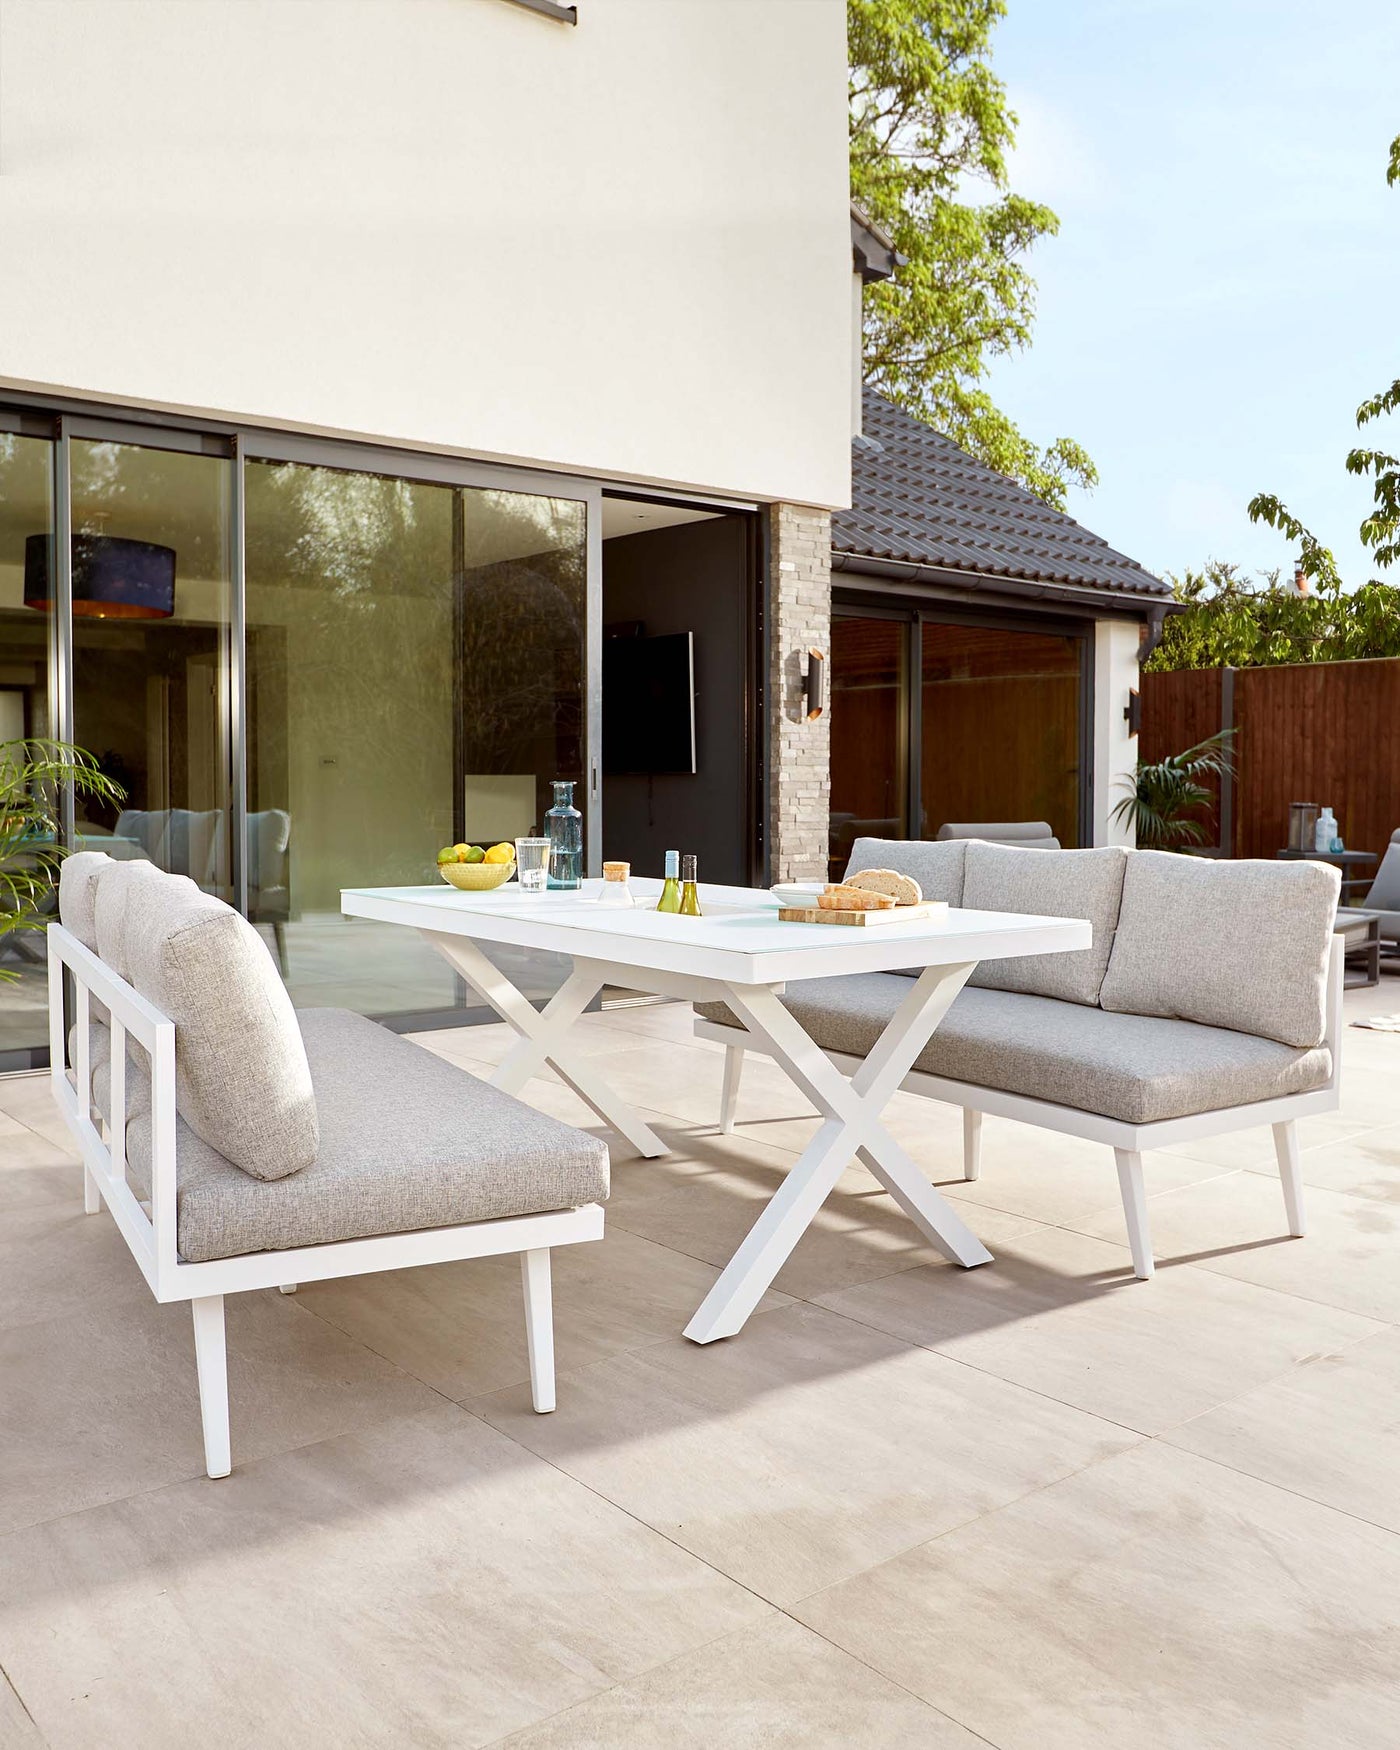 Modern outdoor furniture set featuring a white rectangular dining table with a minimalist design and criss-cross legs, paired with two armless, light grey upholstered dining chairs with white frames. The set is arranged on a beige tiled patio.